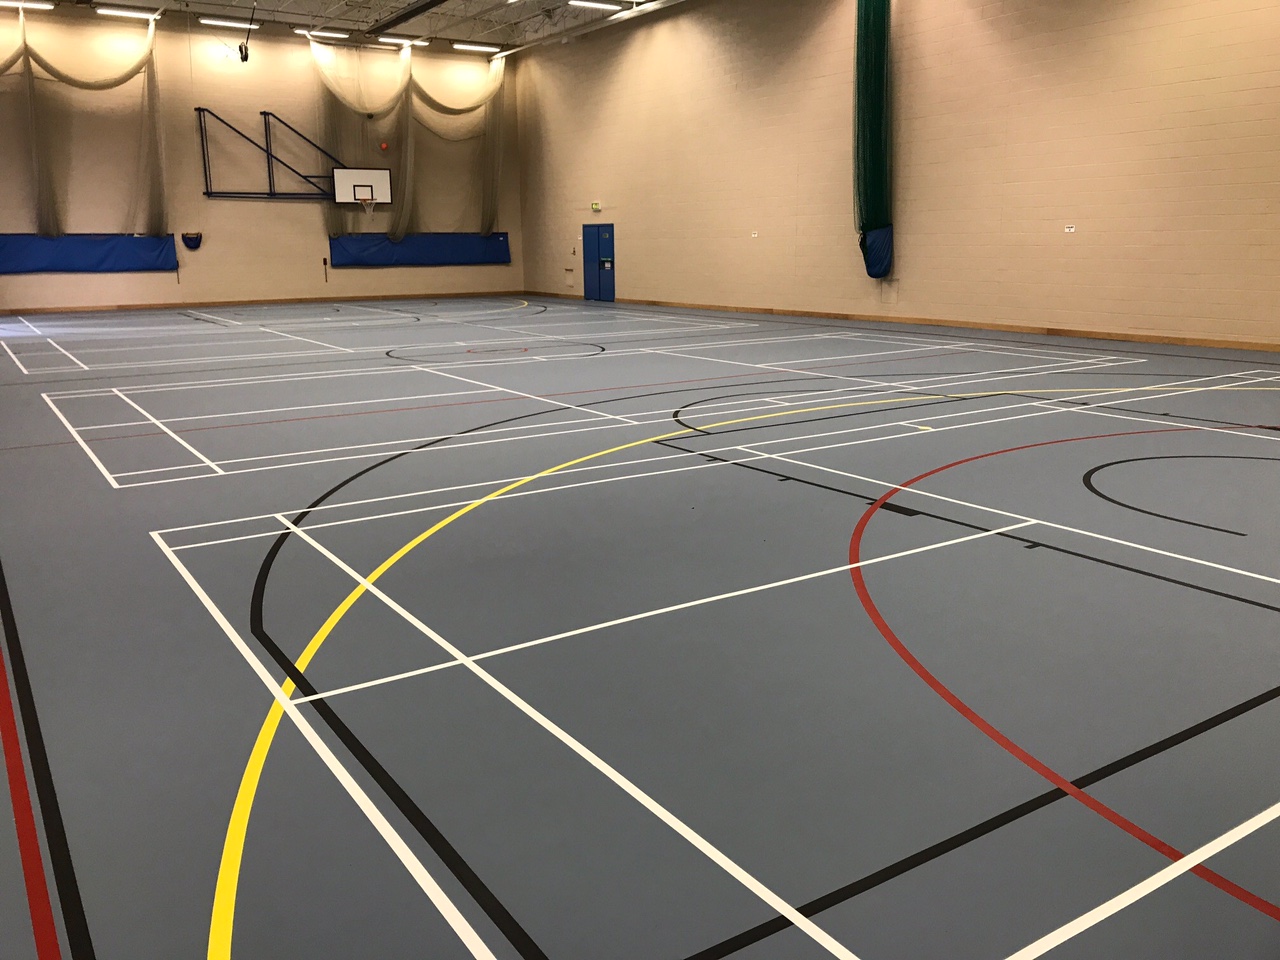 indoor school multi-use pulastic sports floor installation with court markings by Sports Surfaces UK